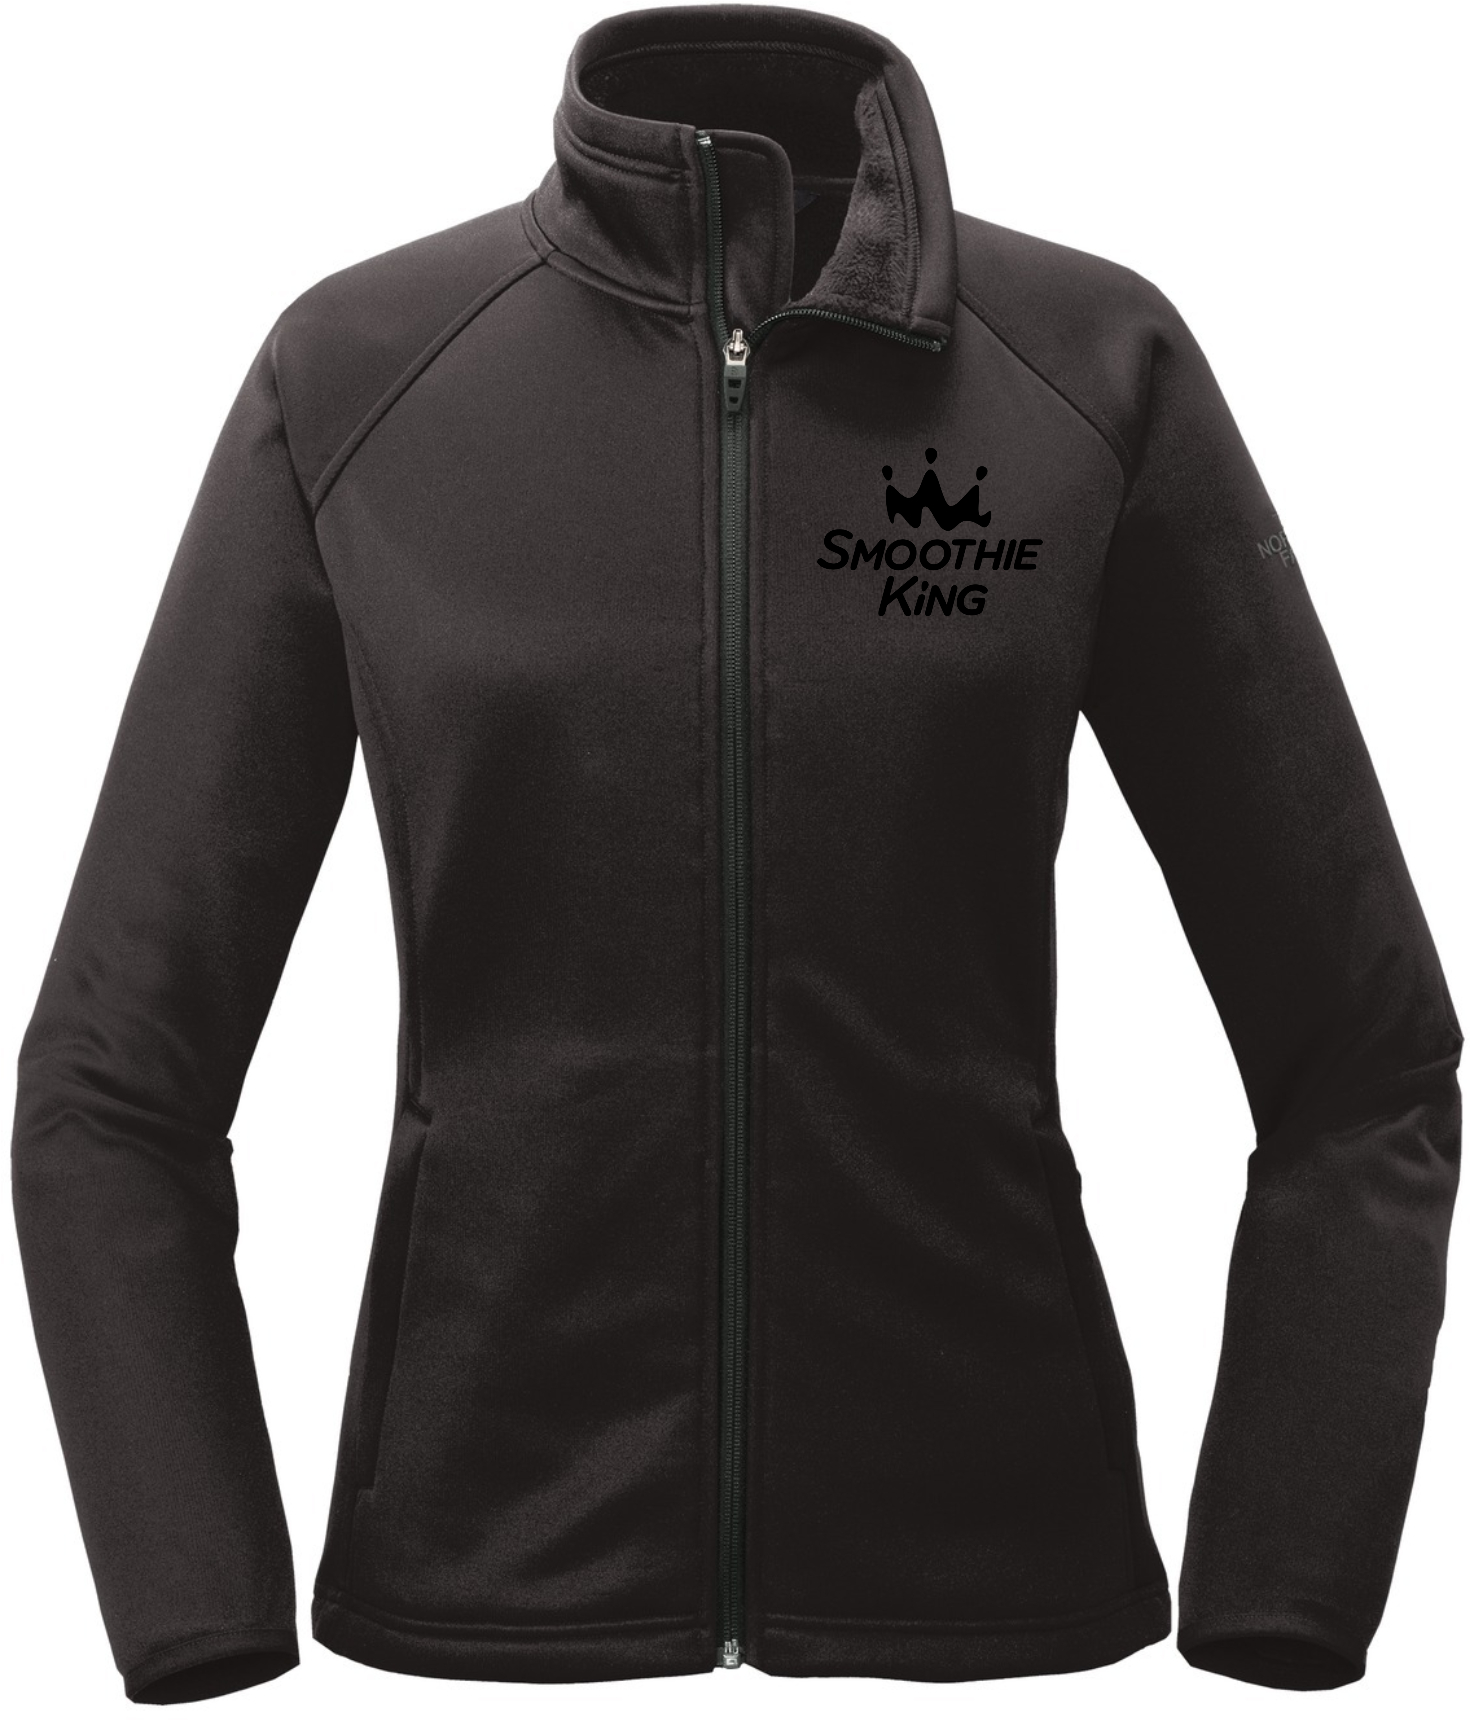 The North Face® Ladies Canyon Flats Stretch Fleece Jacket NF0A3LHA (Black)